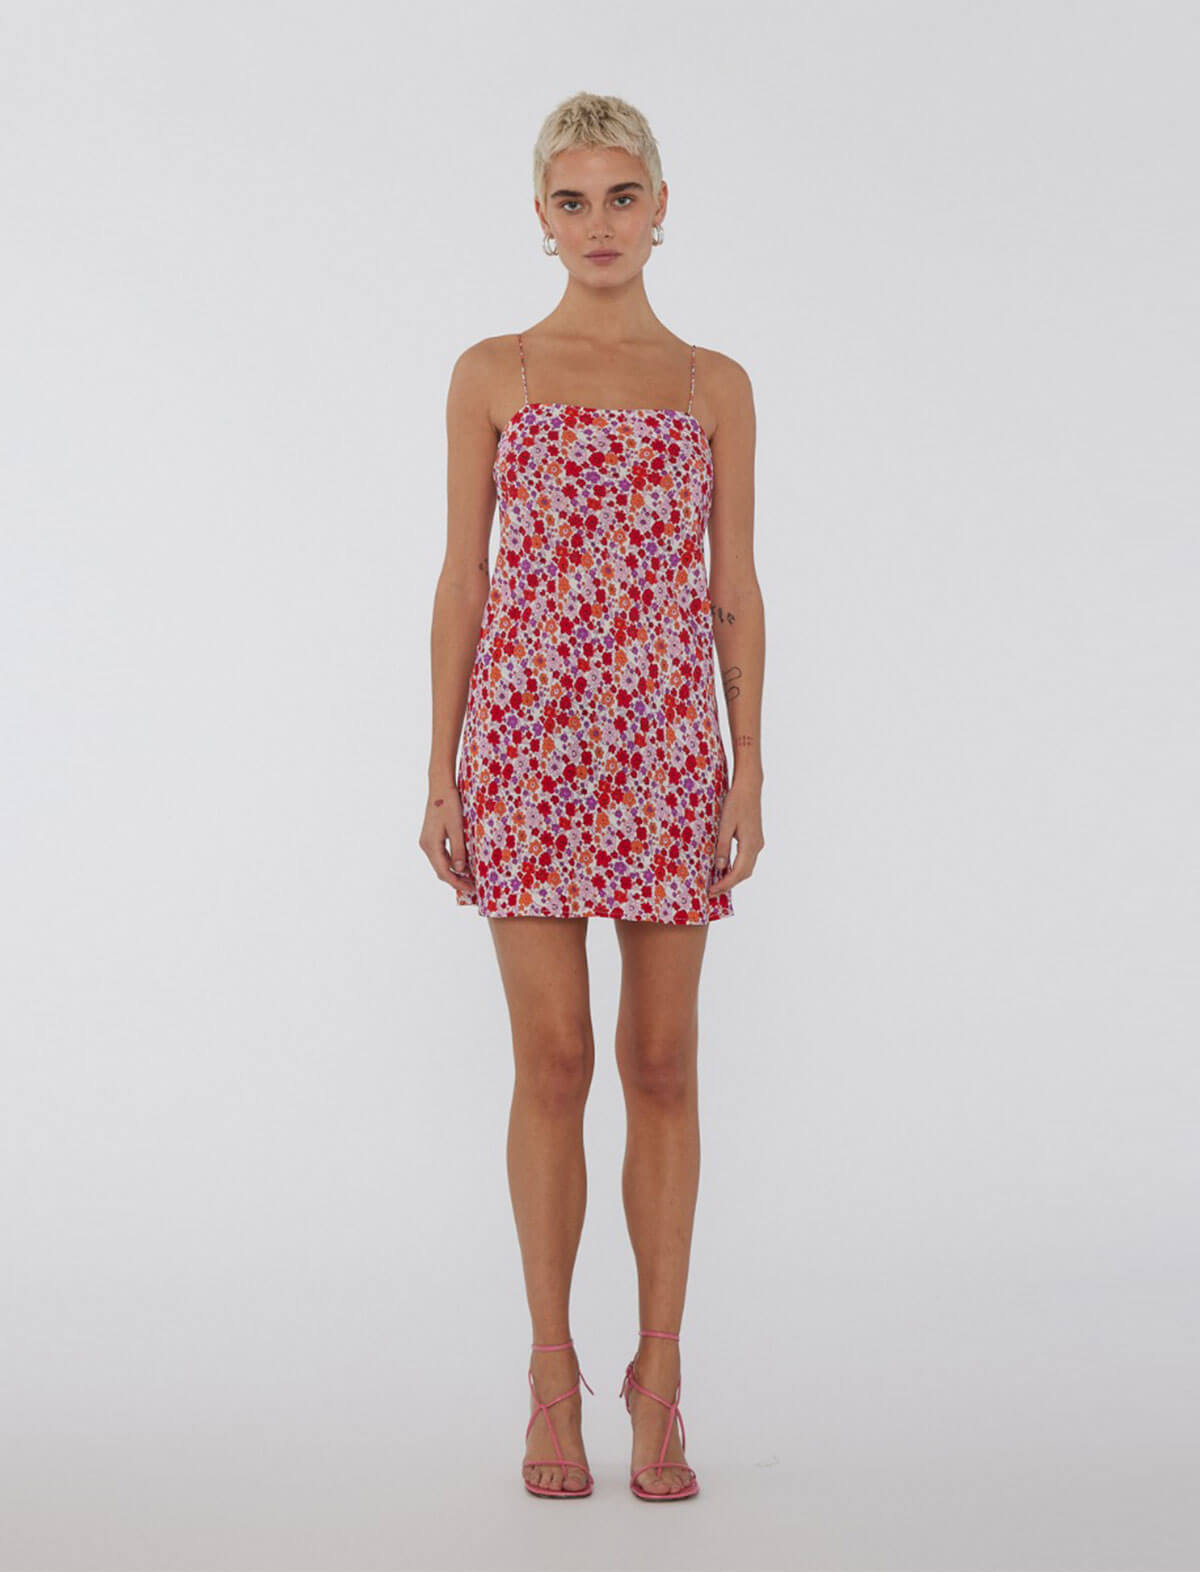 ROTATE SUNDAY 6 Jacquard Mini Dress in Red Floral Print